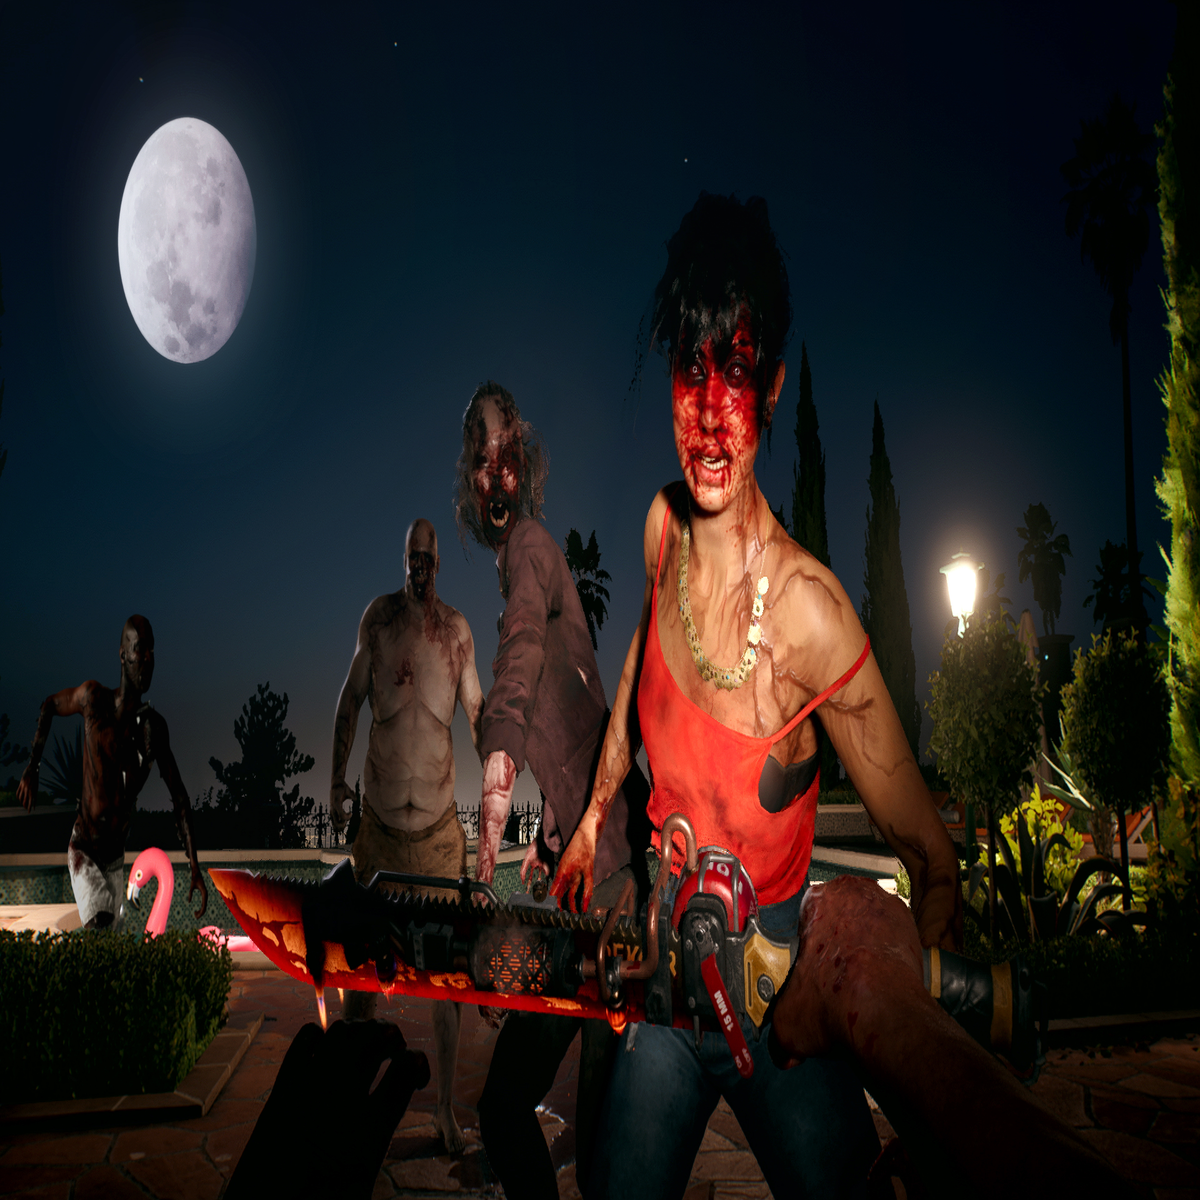 Dead Island 2 Is the Return of the Living Dead of Zombie Games